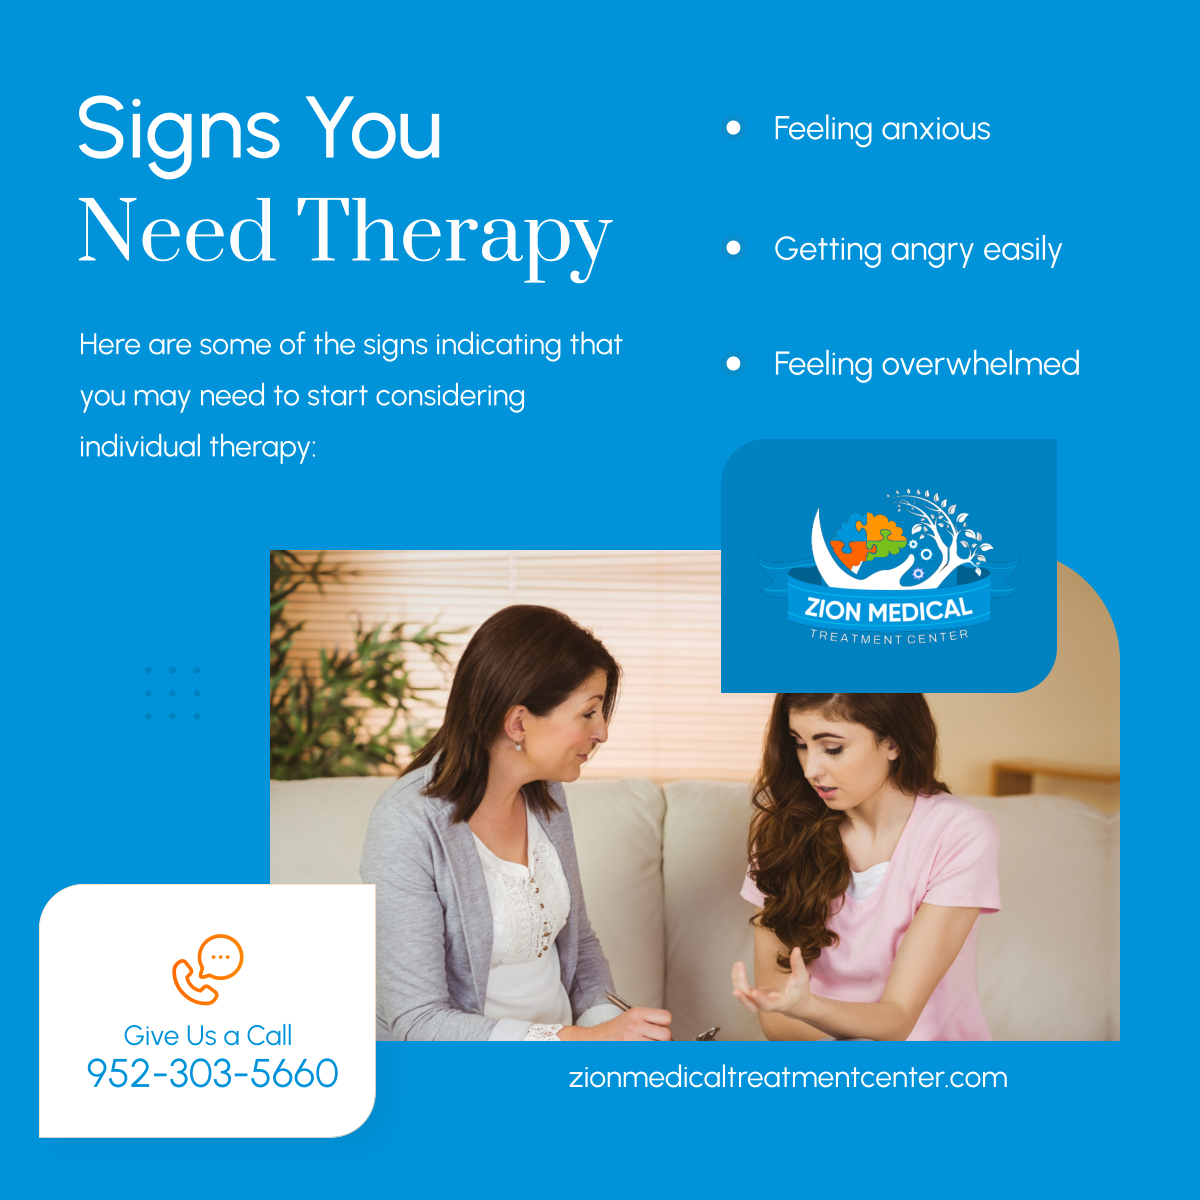 These signs are your body's way of telling you that seeking professional guidance can help you regain control and find emotional balance. If you need individual therapy, please let us know.

#Signs #RecoveryCenter #BurnsvilleMN #IndividualTherapy